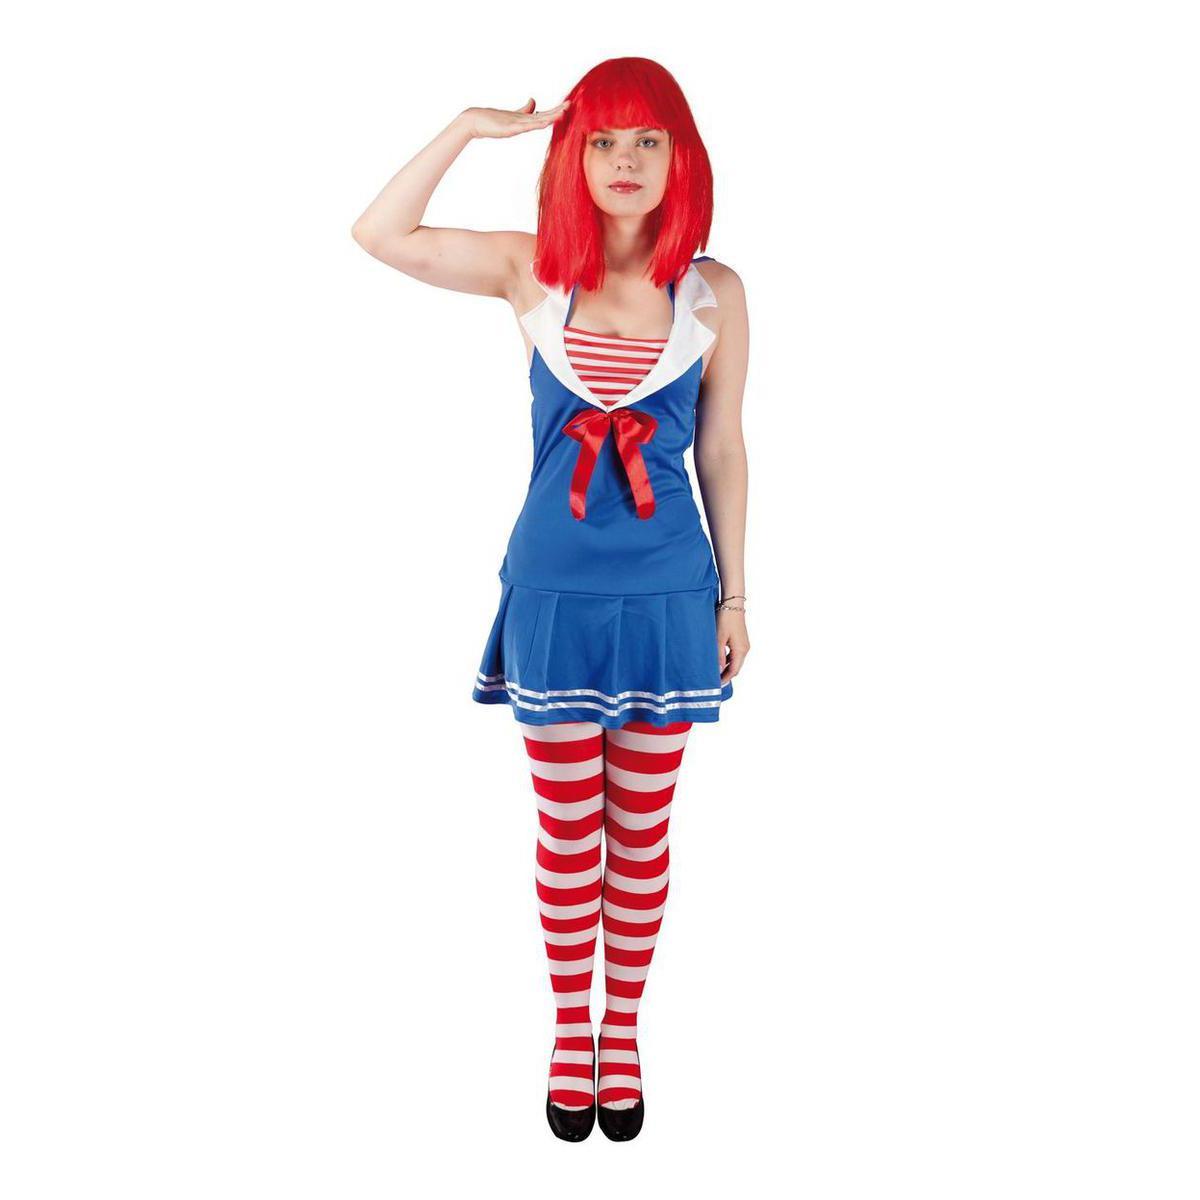 Costume adulte femme marin sexy en polyester - Taille unique - Multicolore